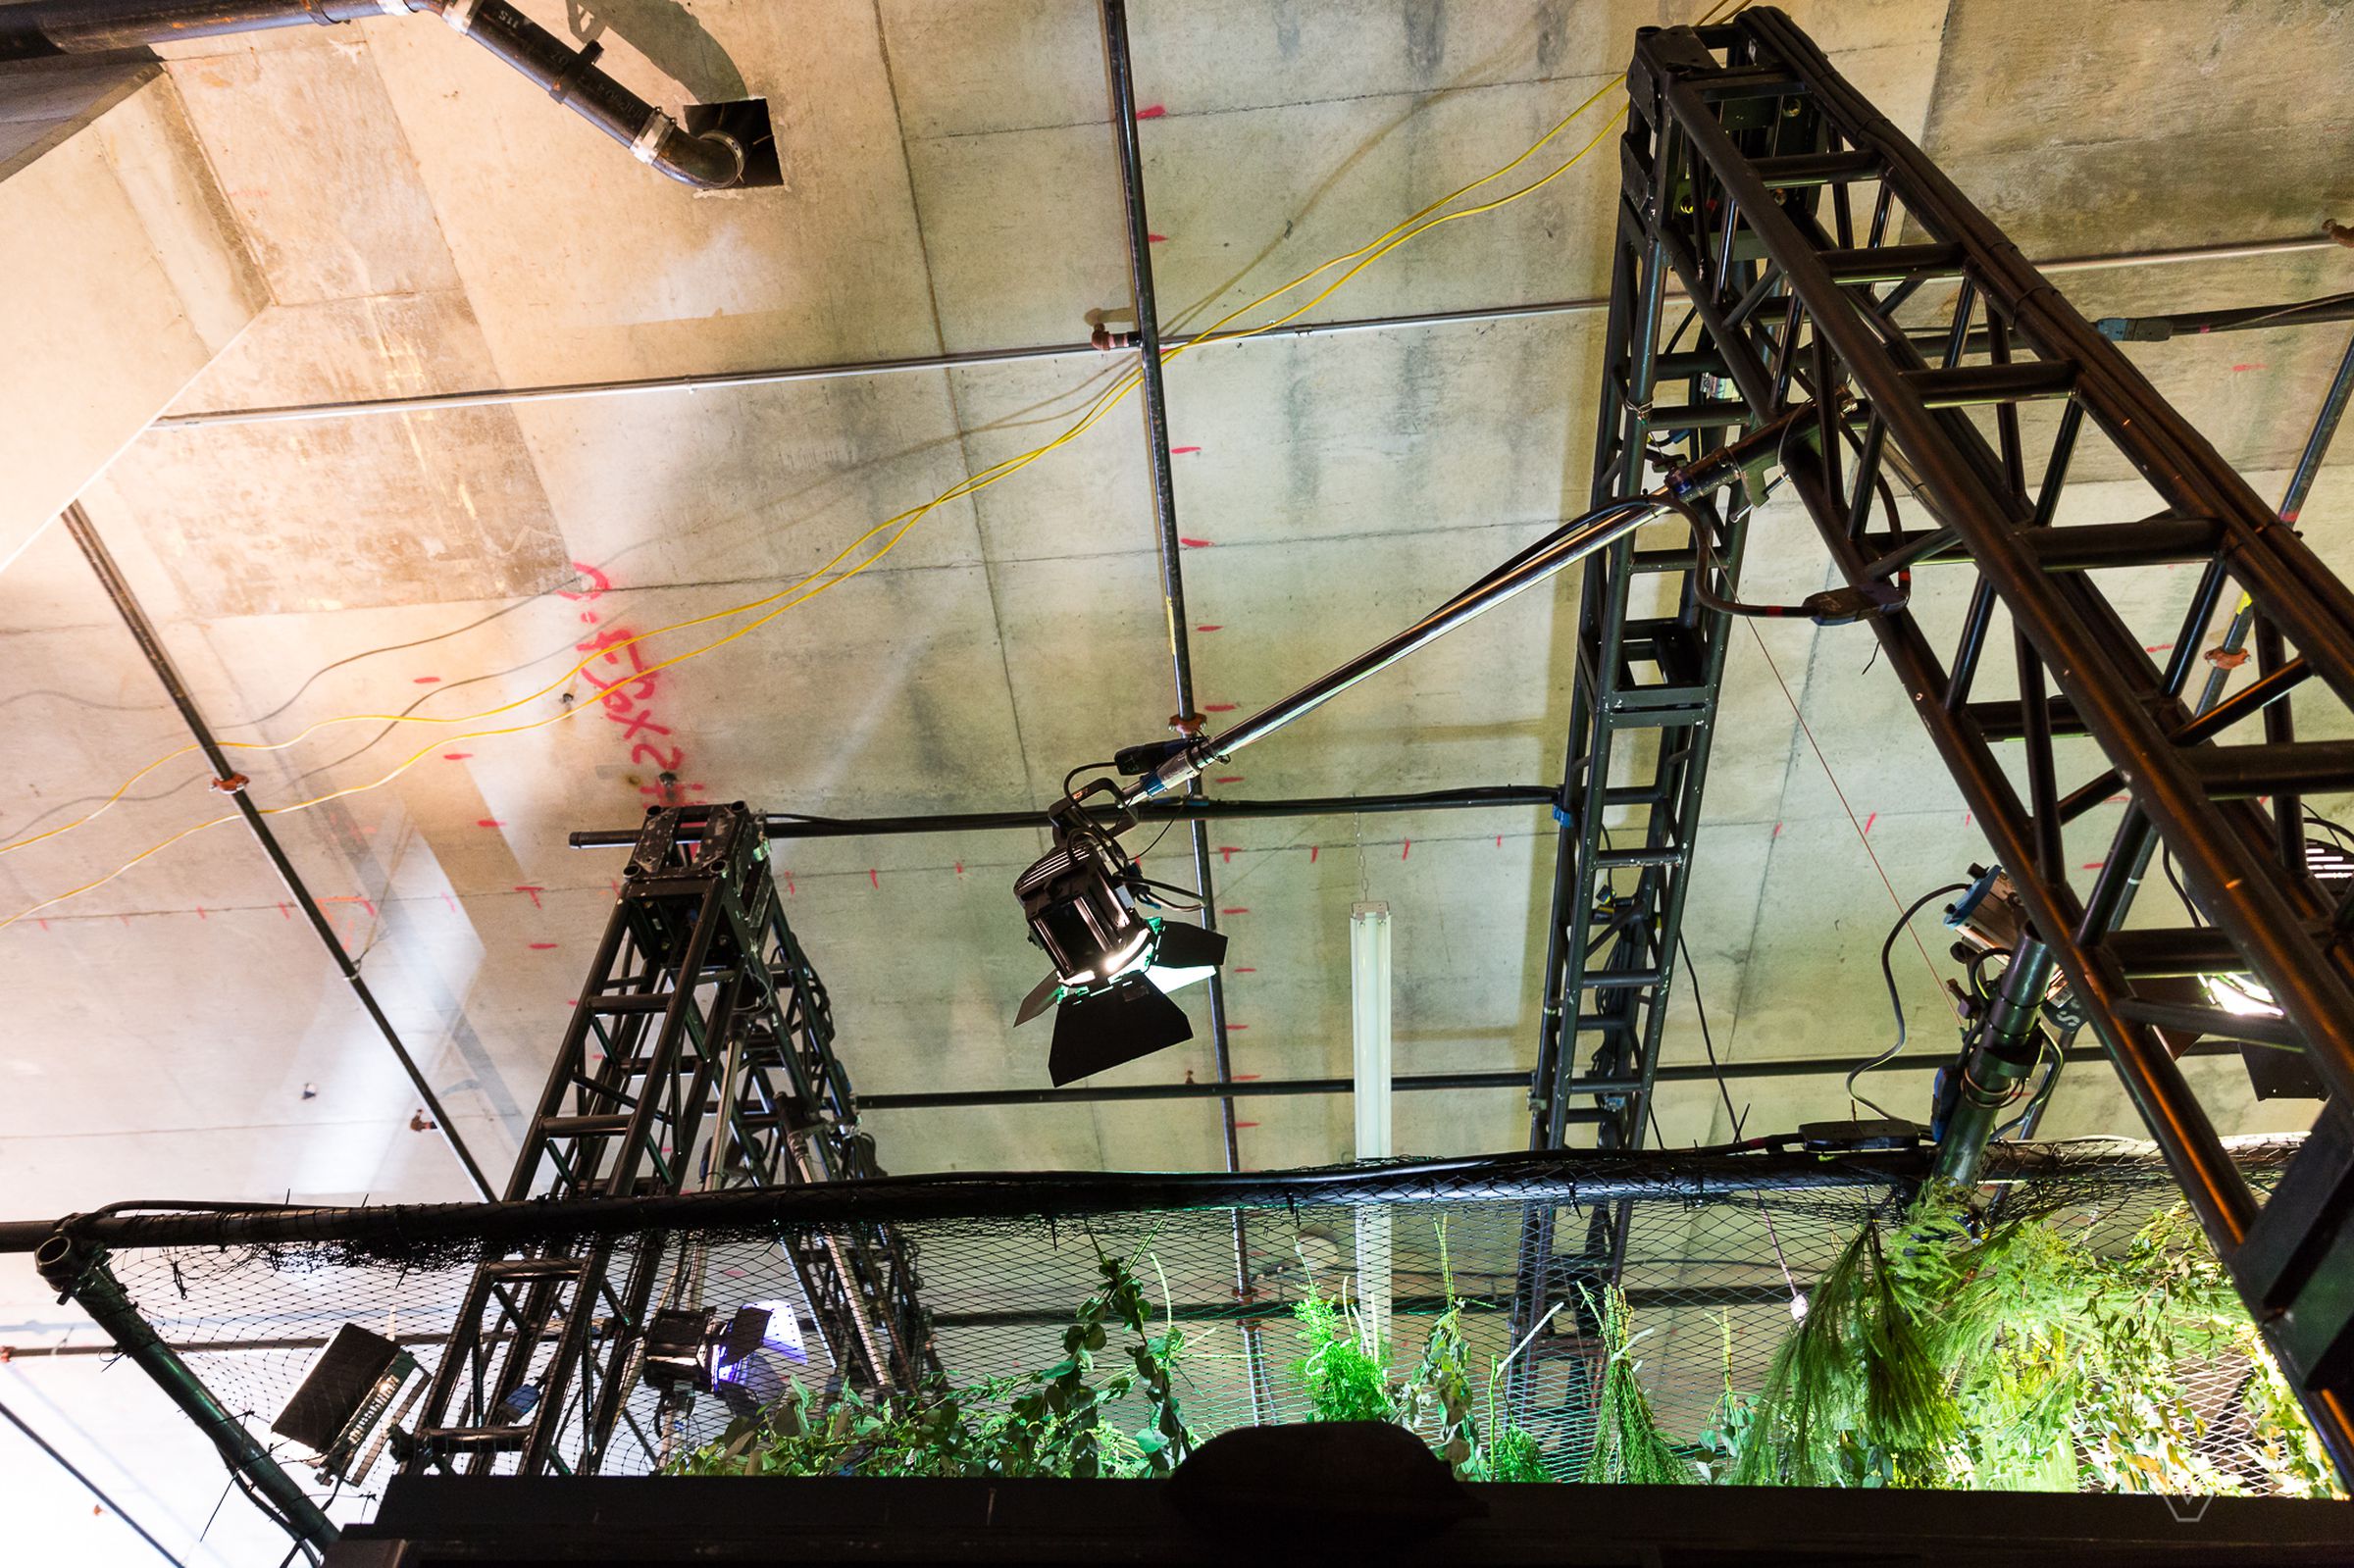 While it may look like a real forest, a glimpse behind the scenes shows the very real ceiling and light rigs hidden above